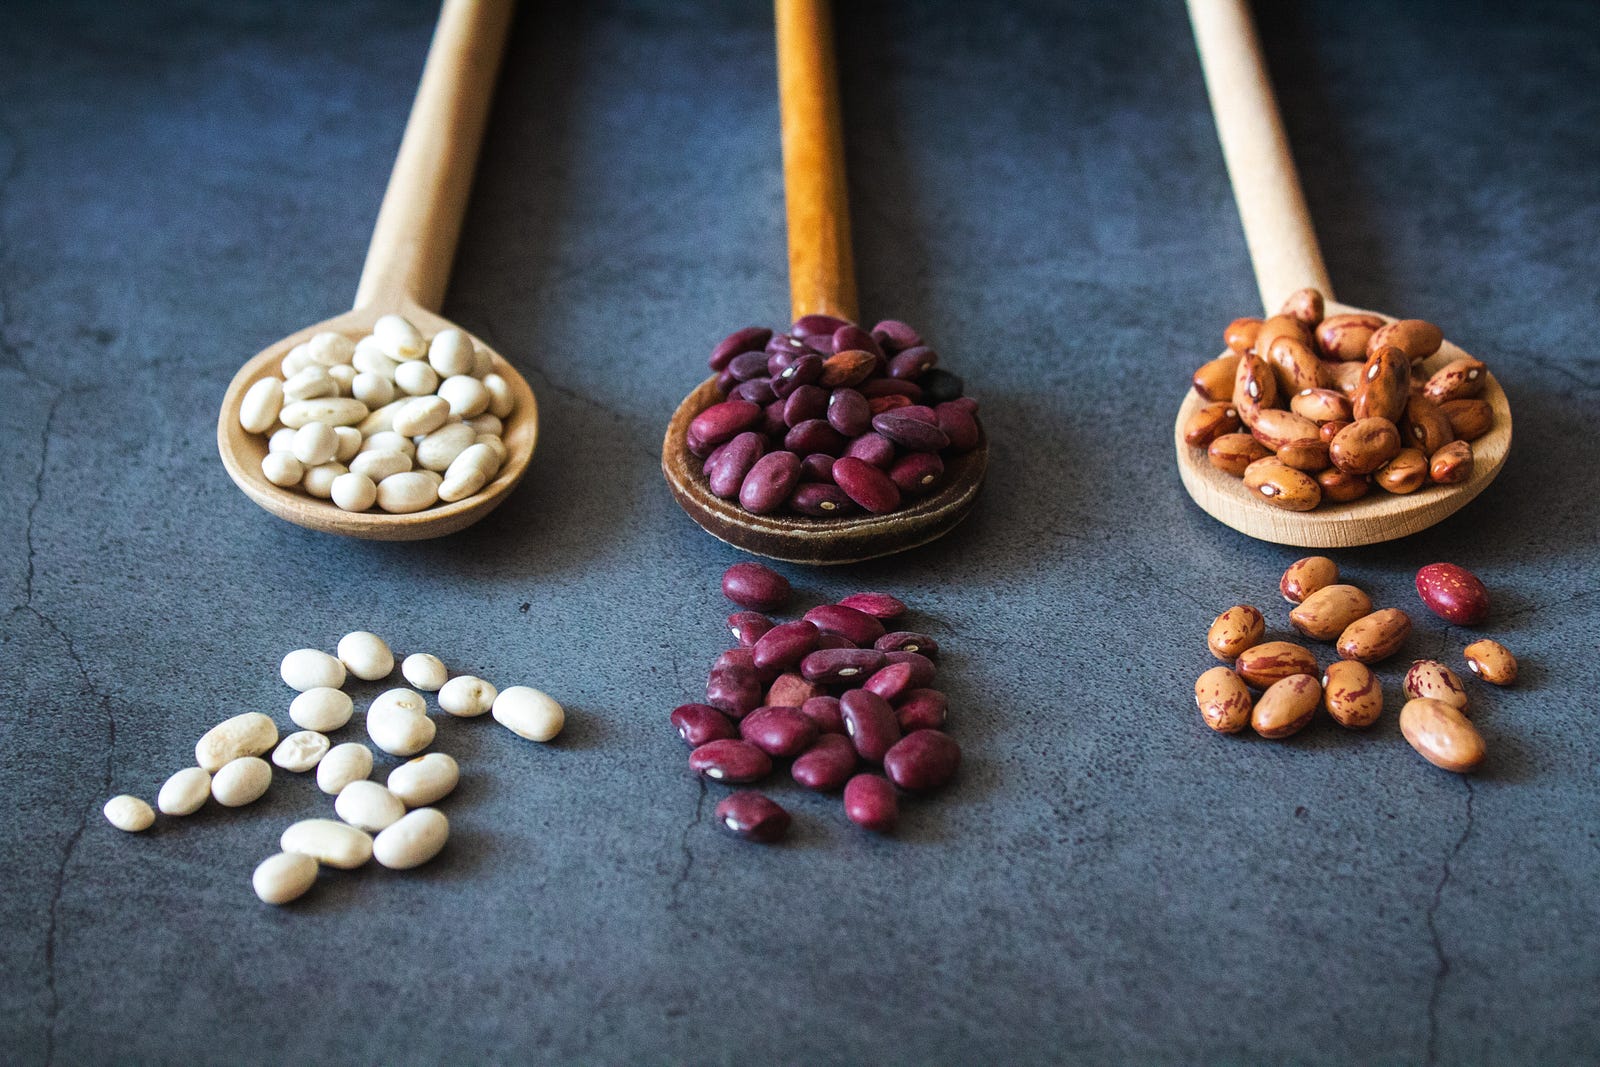 Three small wooden spoons extend from the image top, holding white, purple, and brown soybeans, respectively. The table is blue-gray. Soy is rich in plant estrogens, known as isoflavones.